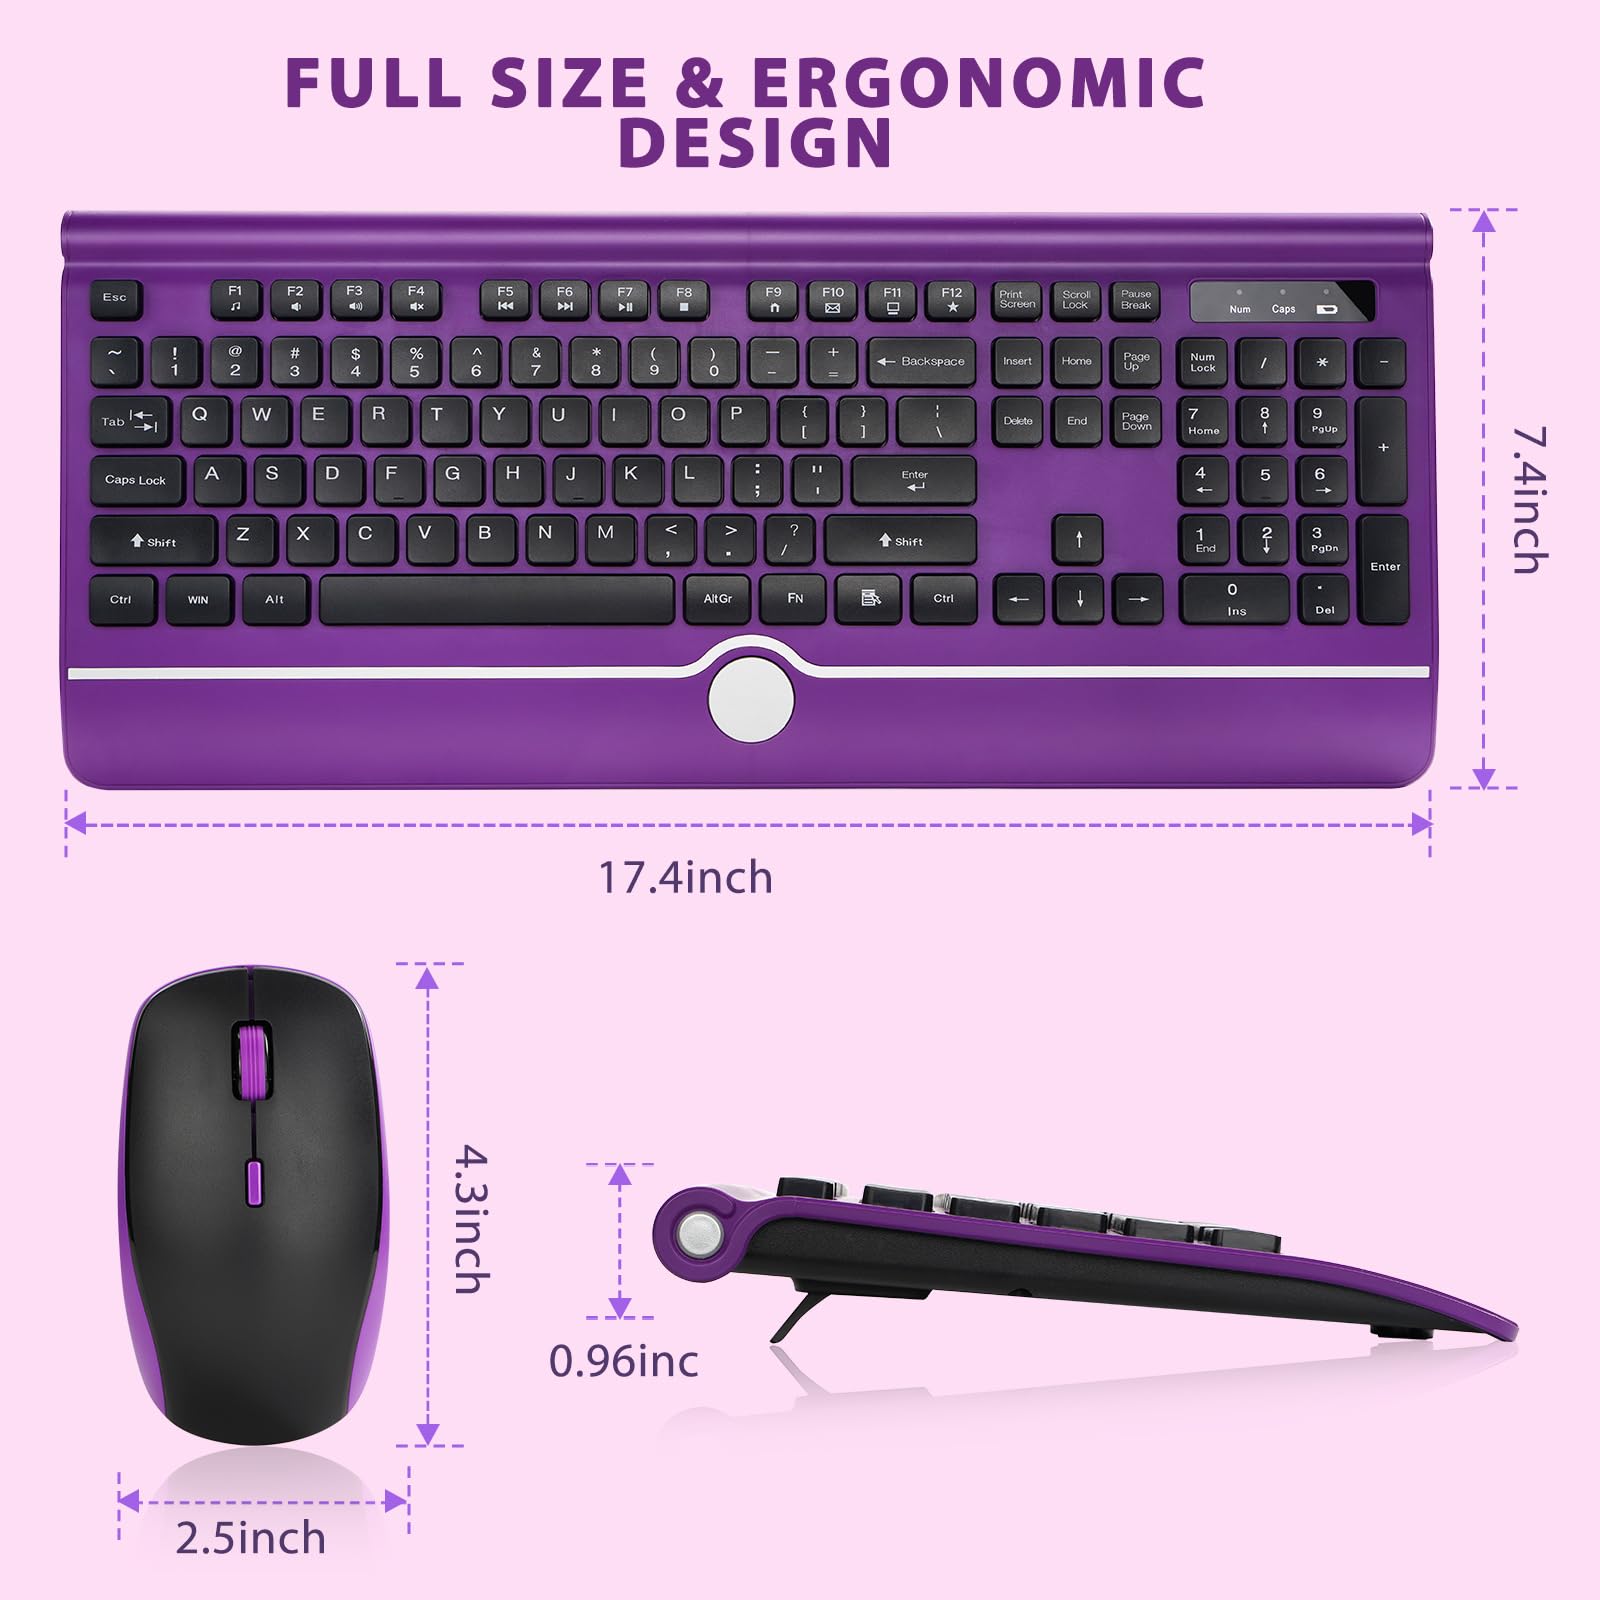 Wireless Keyboard and Mouse, KOPJIPPOM Purple Keyboard and Mouse with Wrist Rest, 2.4G Silent Cordless Full-Size Keyboard Mouse Combo for Windows Computers Desktop, Laptop, PC